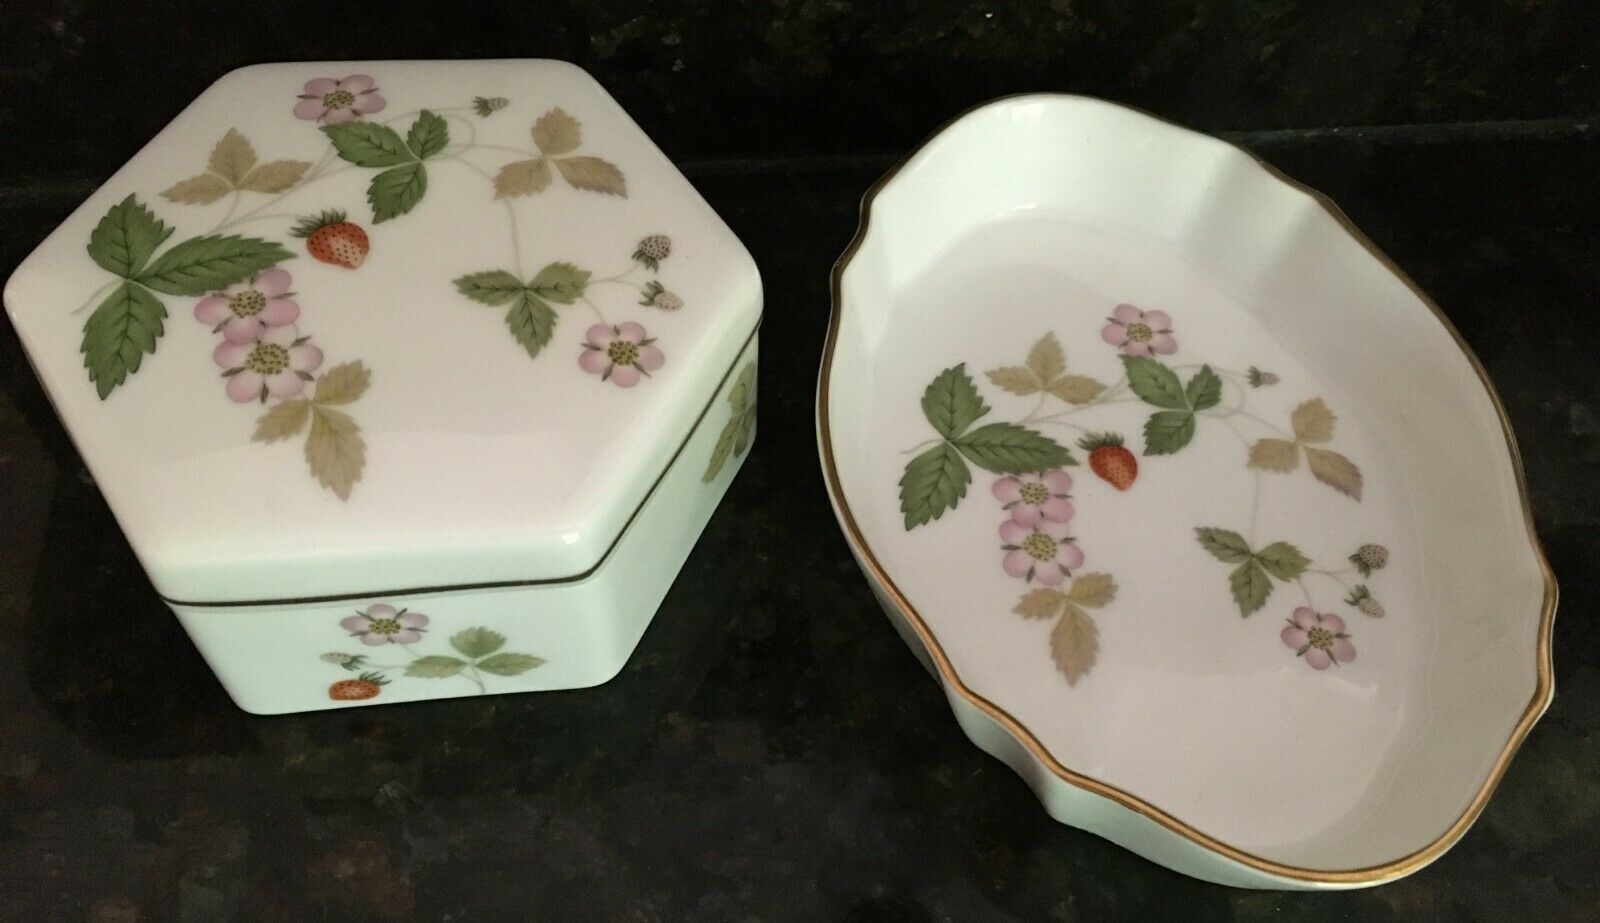 Primary image for Wedgwood Wild Strawberry Hexagonal Box & Small Jewelry Tray Soap Dish Vintage